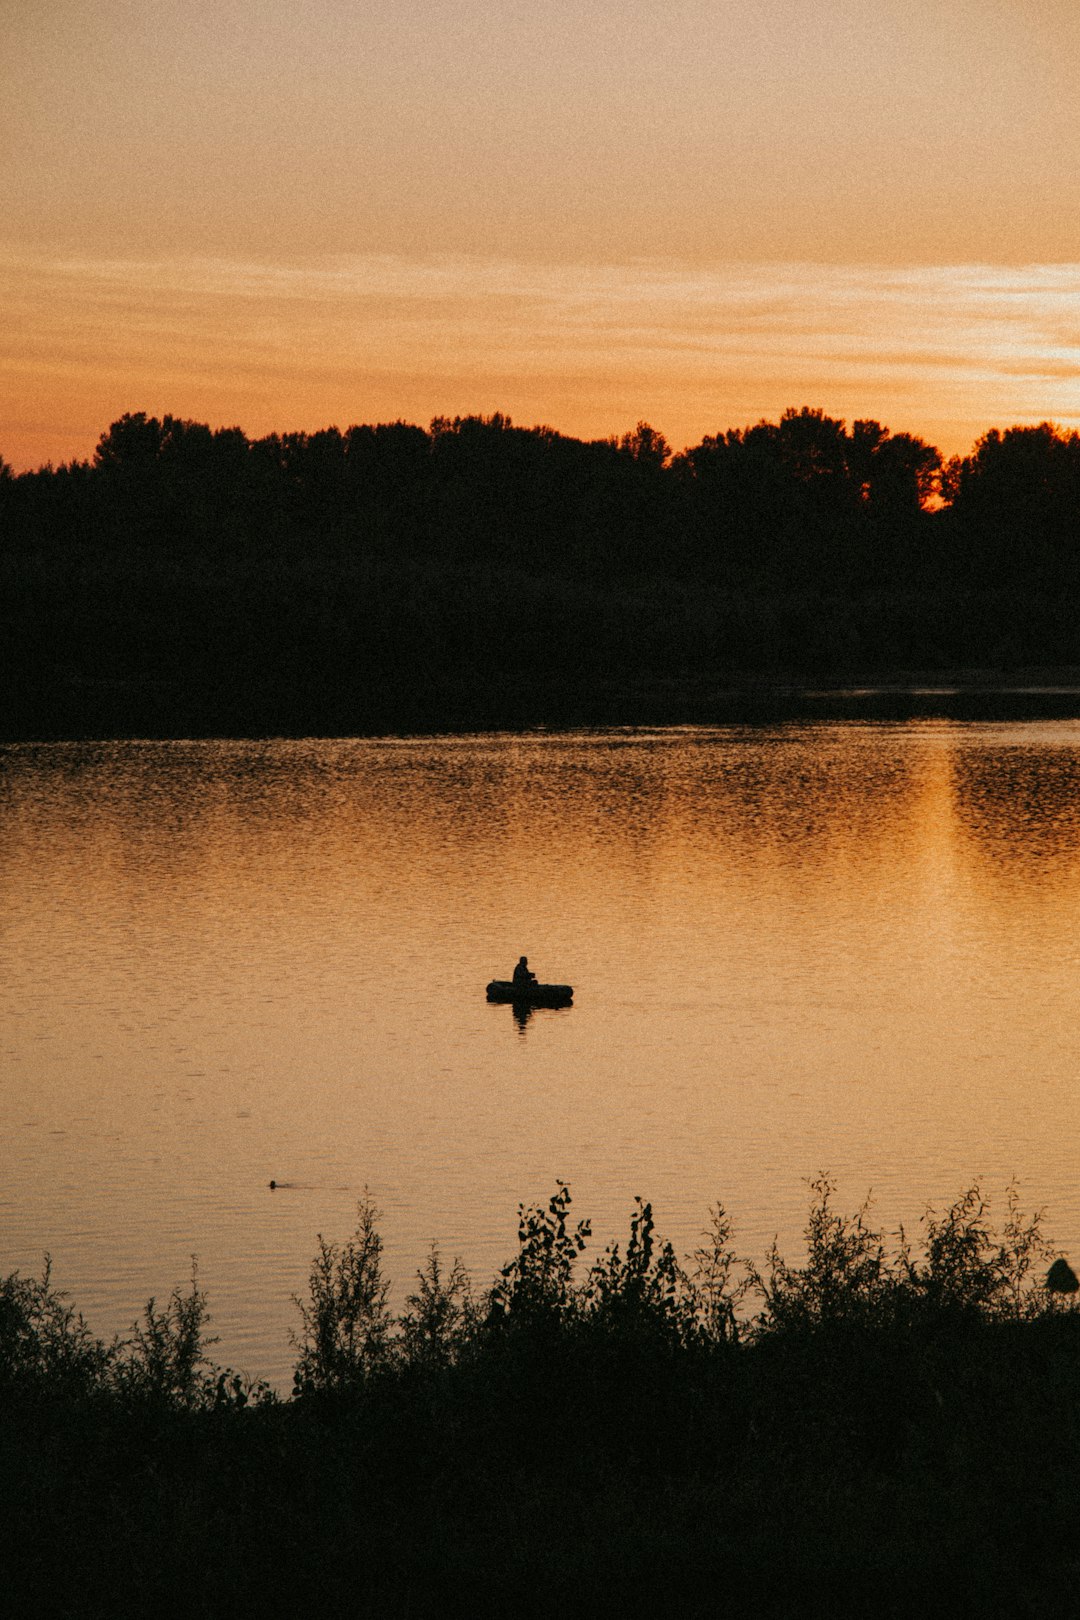 silhouette of man riding on boat on lake during sunset